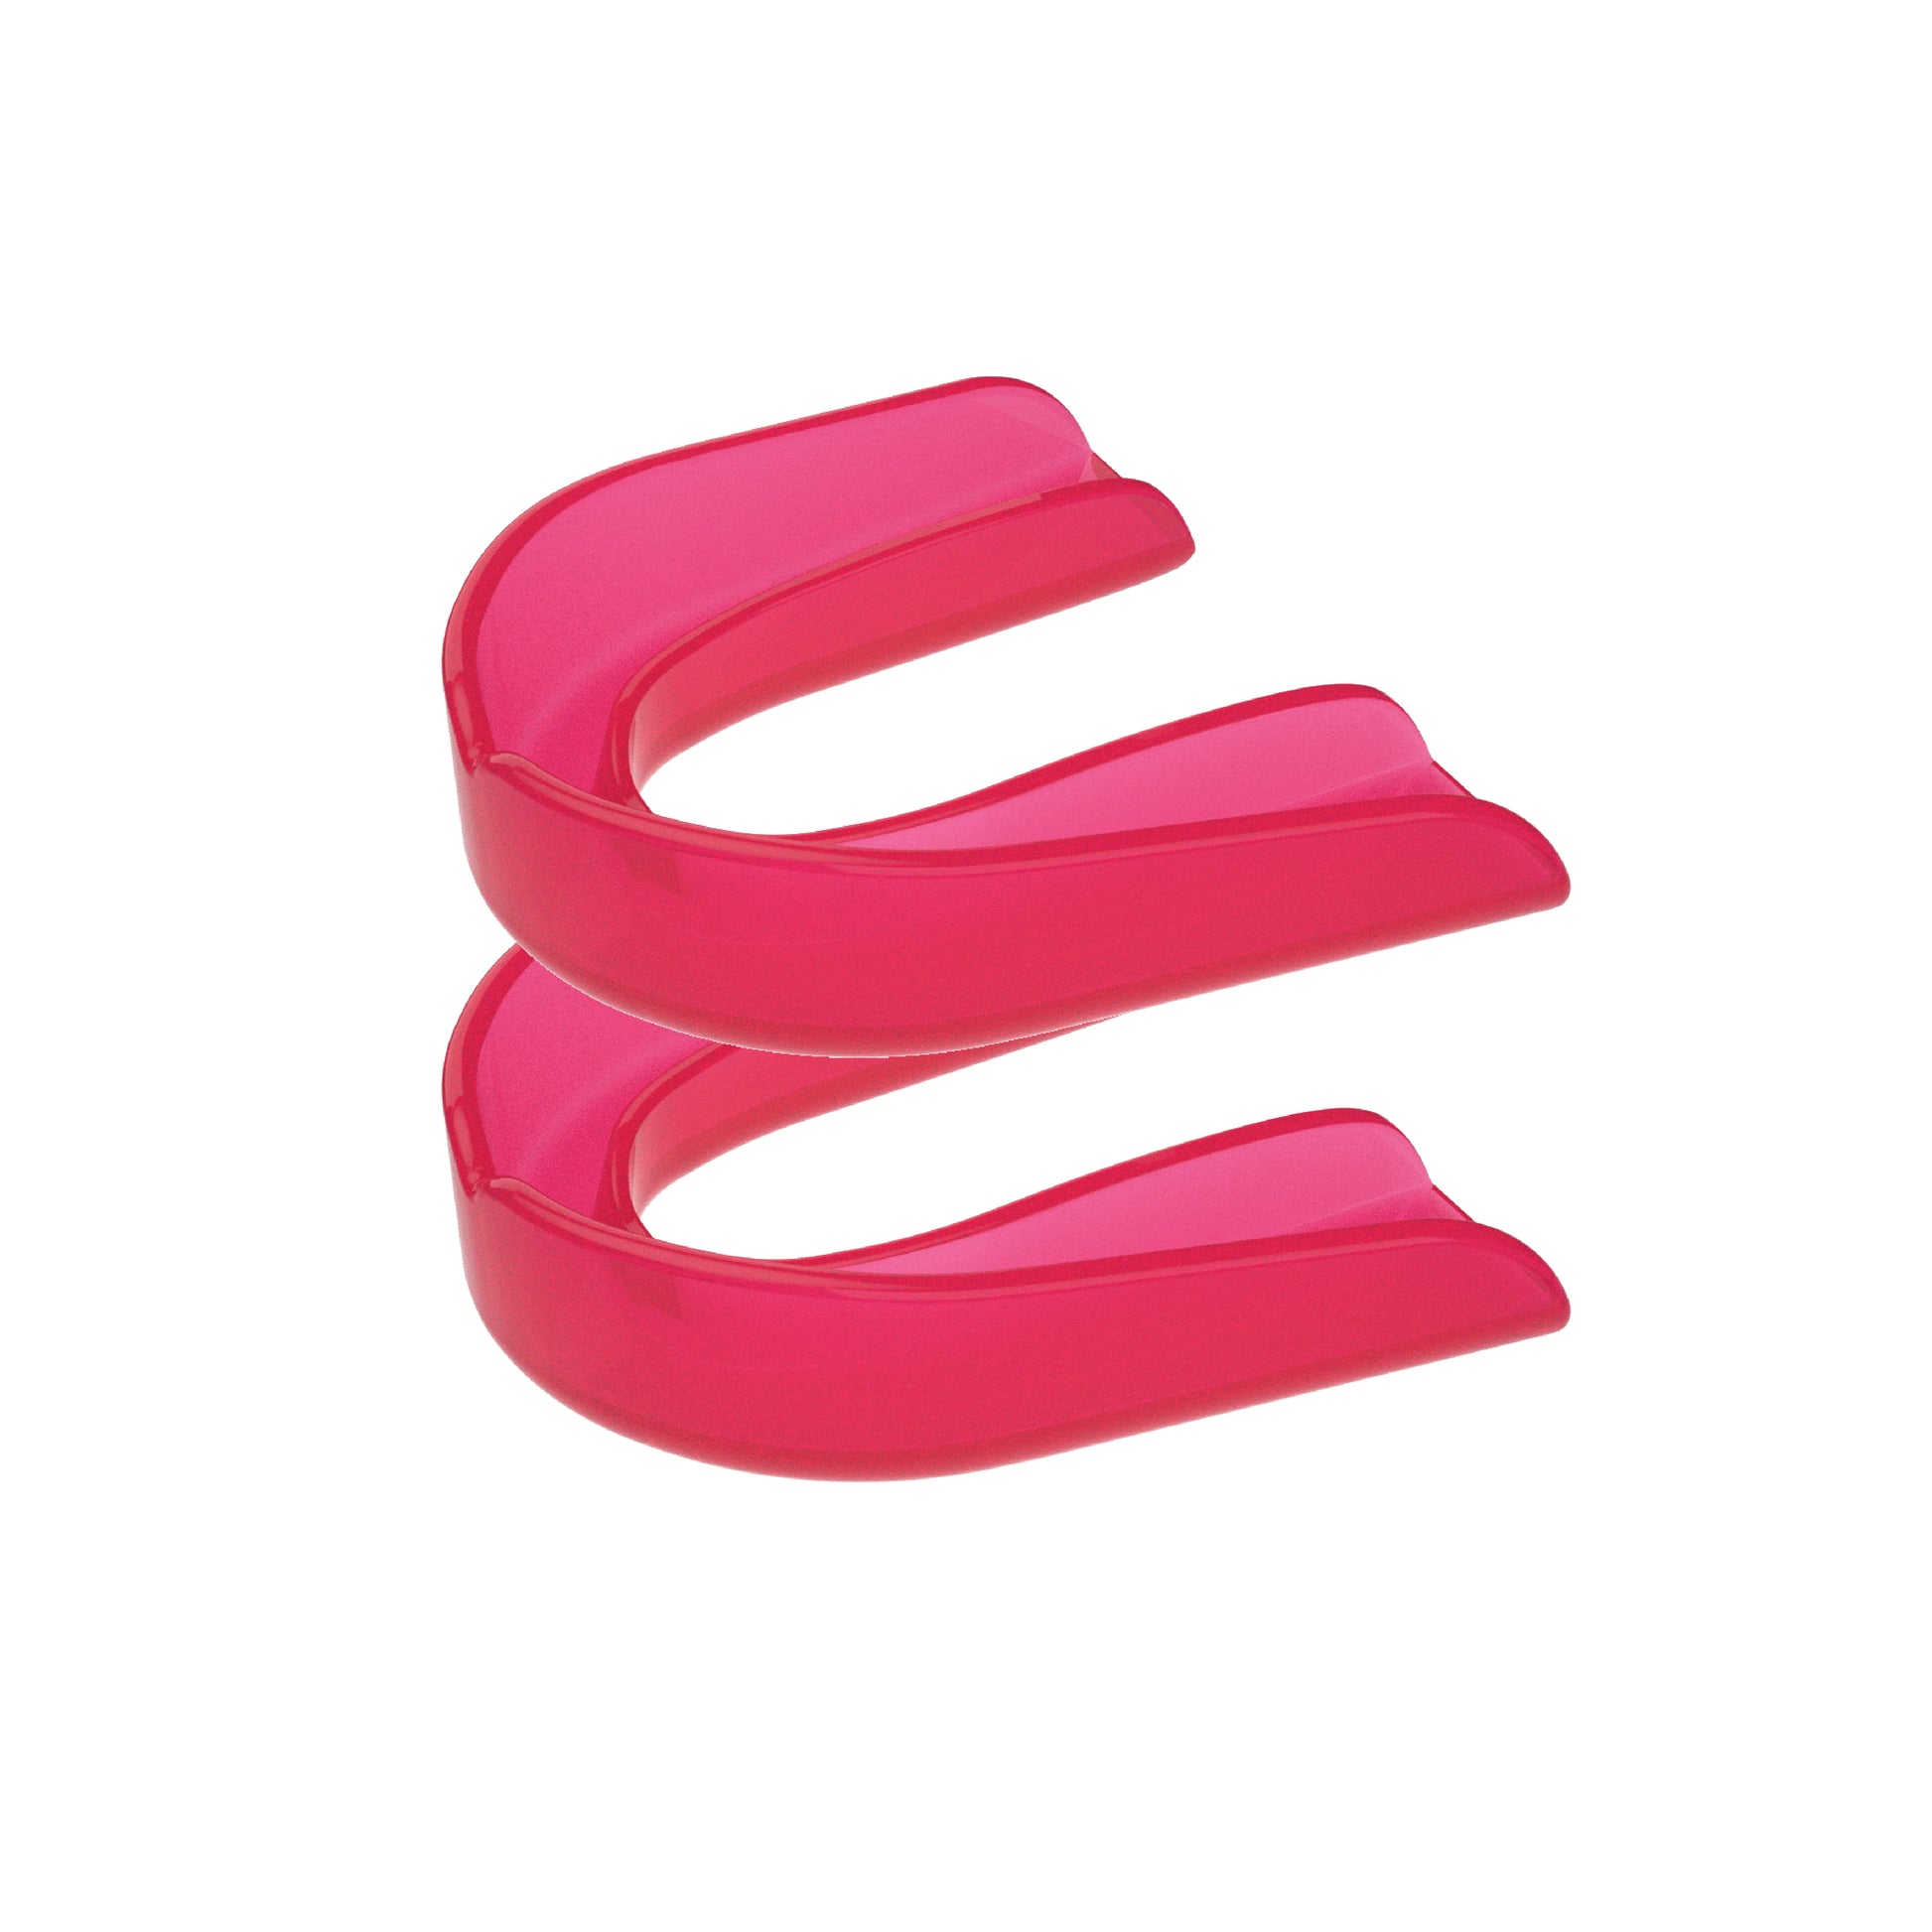 Two hot pink strapless mouth guards